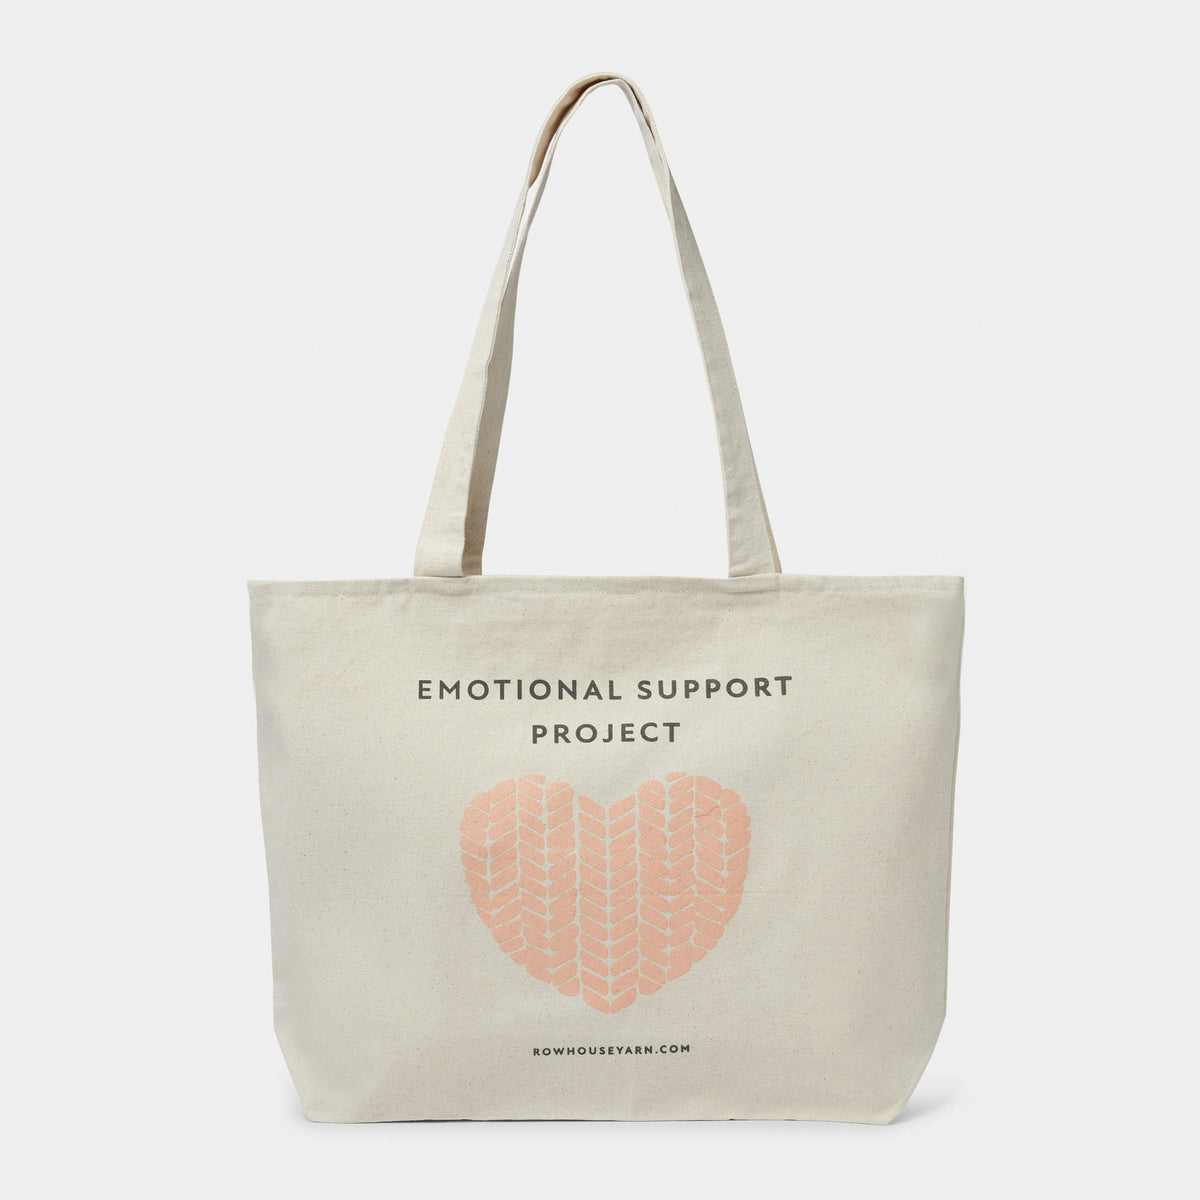 Emotional Support Project Tote Bag — Row House Yarn